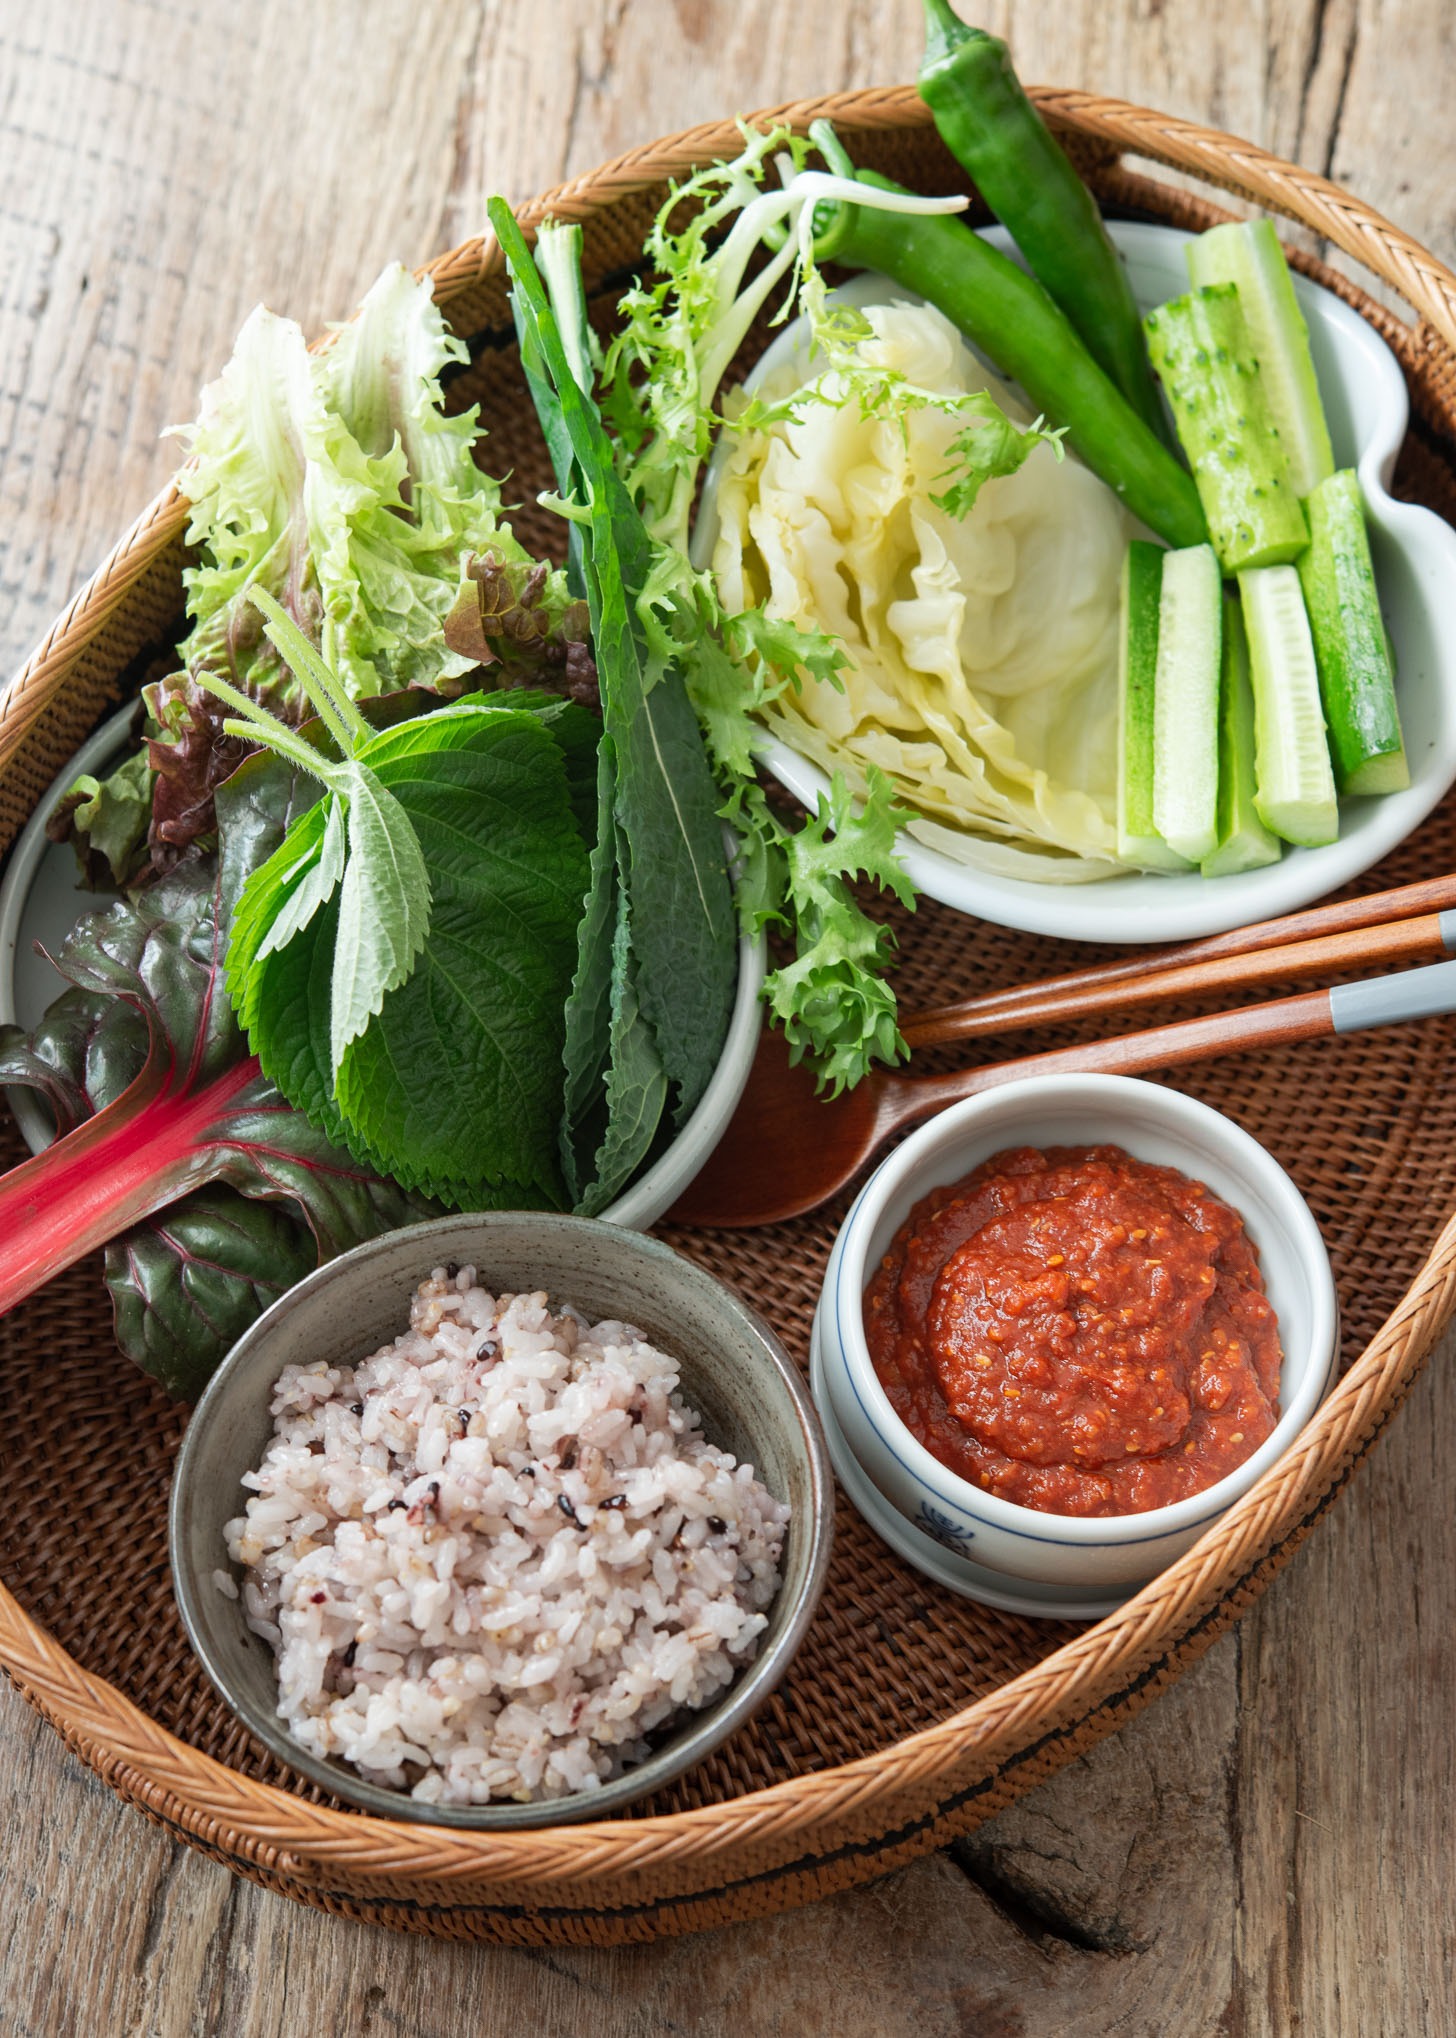 A basket is filled with ssamjang, various lettuce and vegetables, and rice.